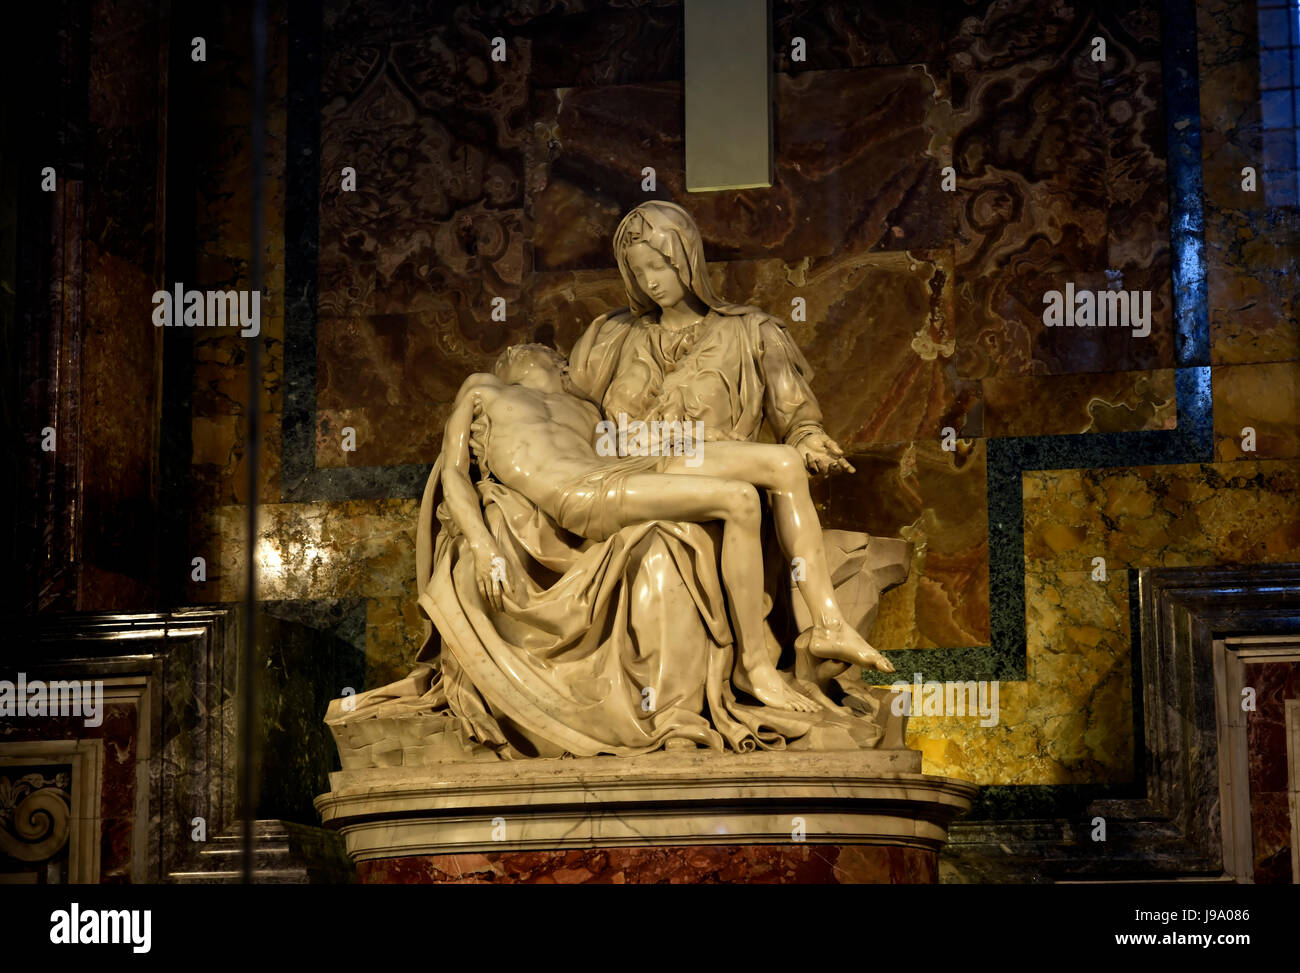 Treasures of the Vatican Museums in Rome Italy Stock Photo - Alamy